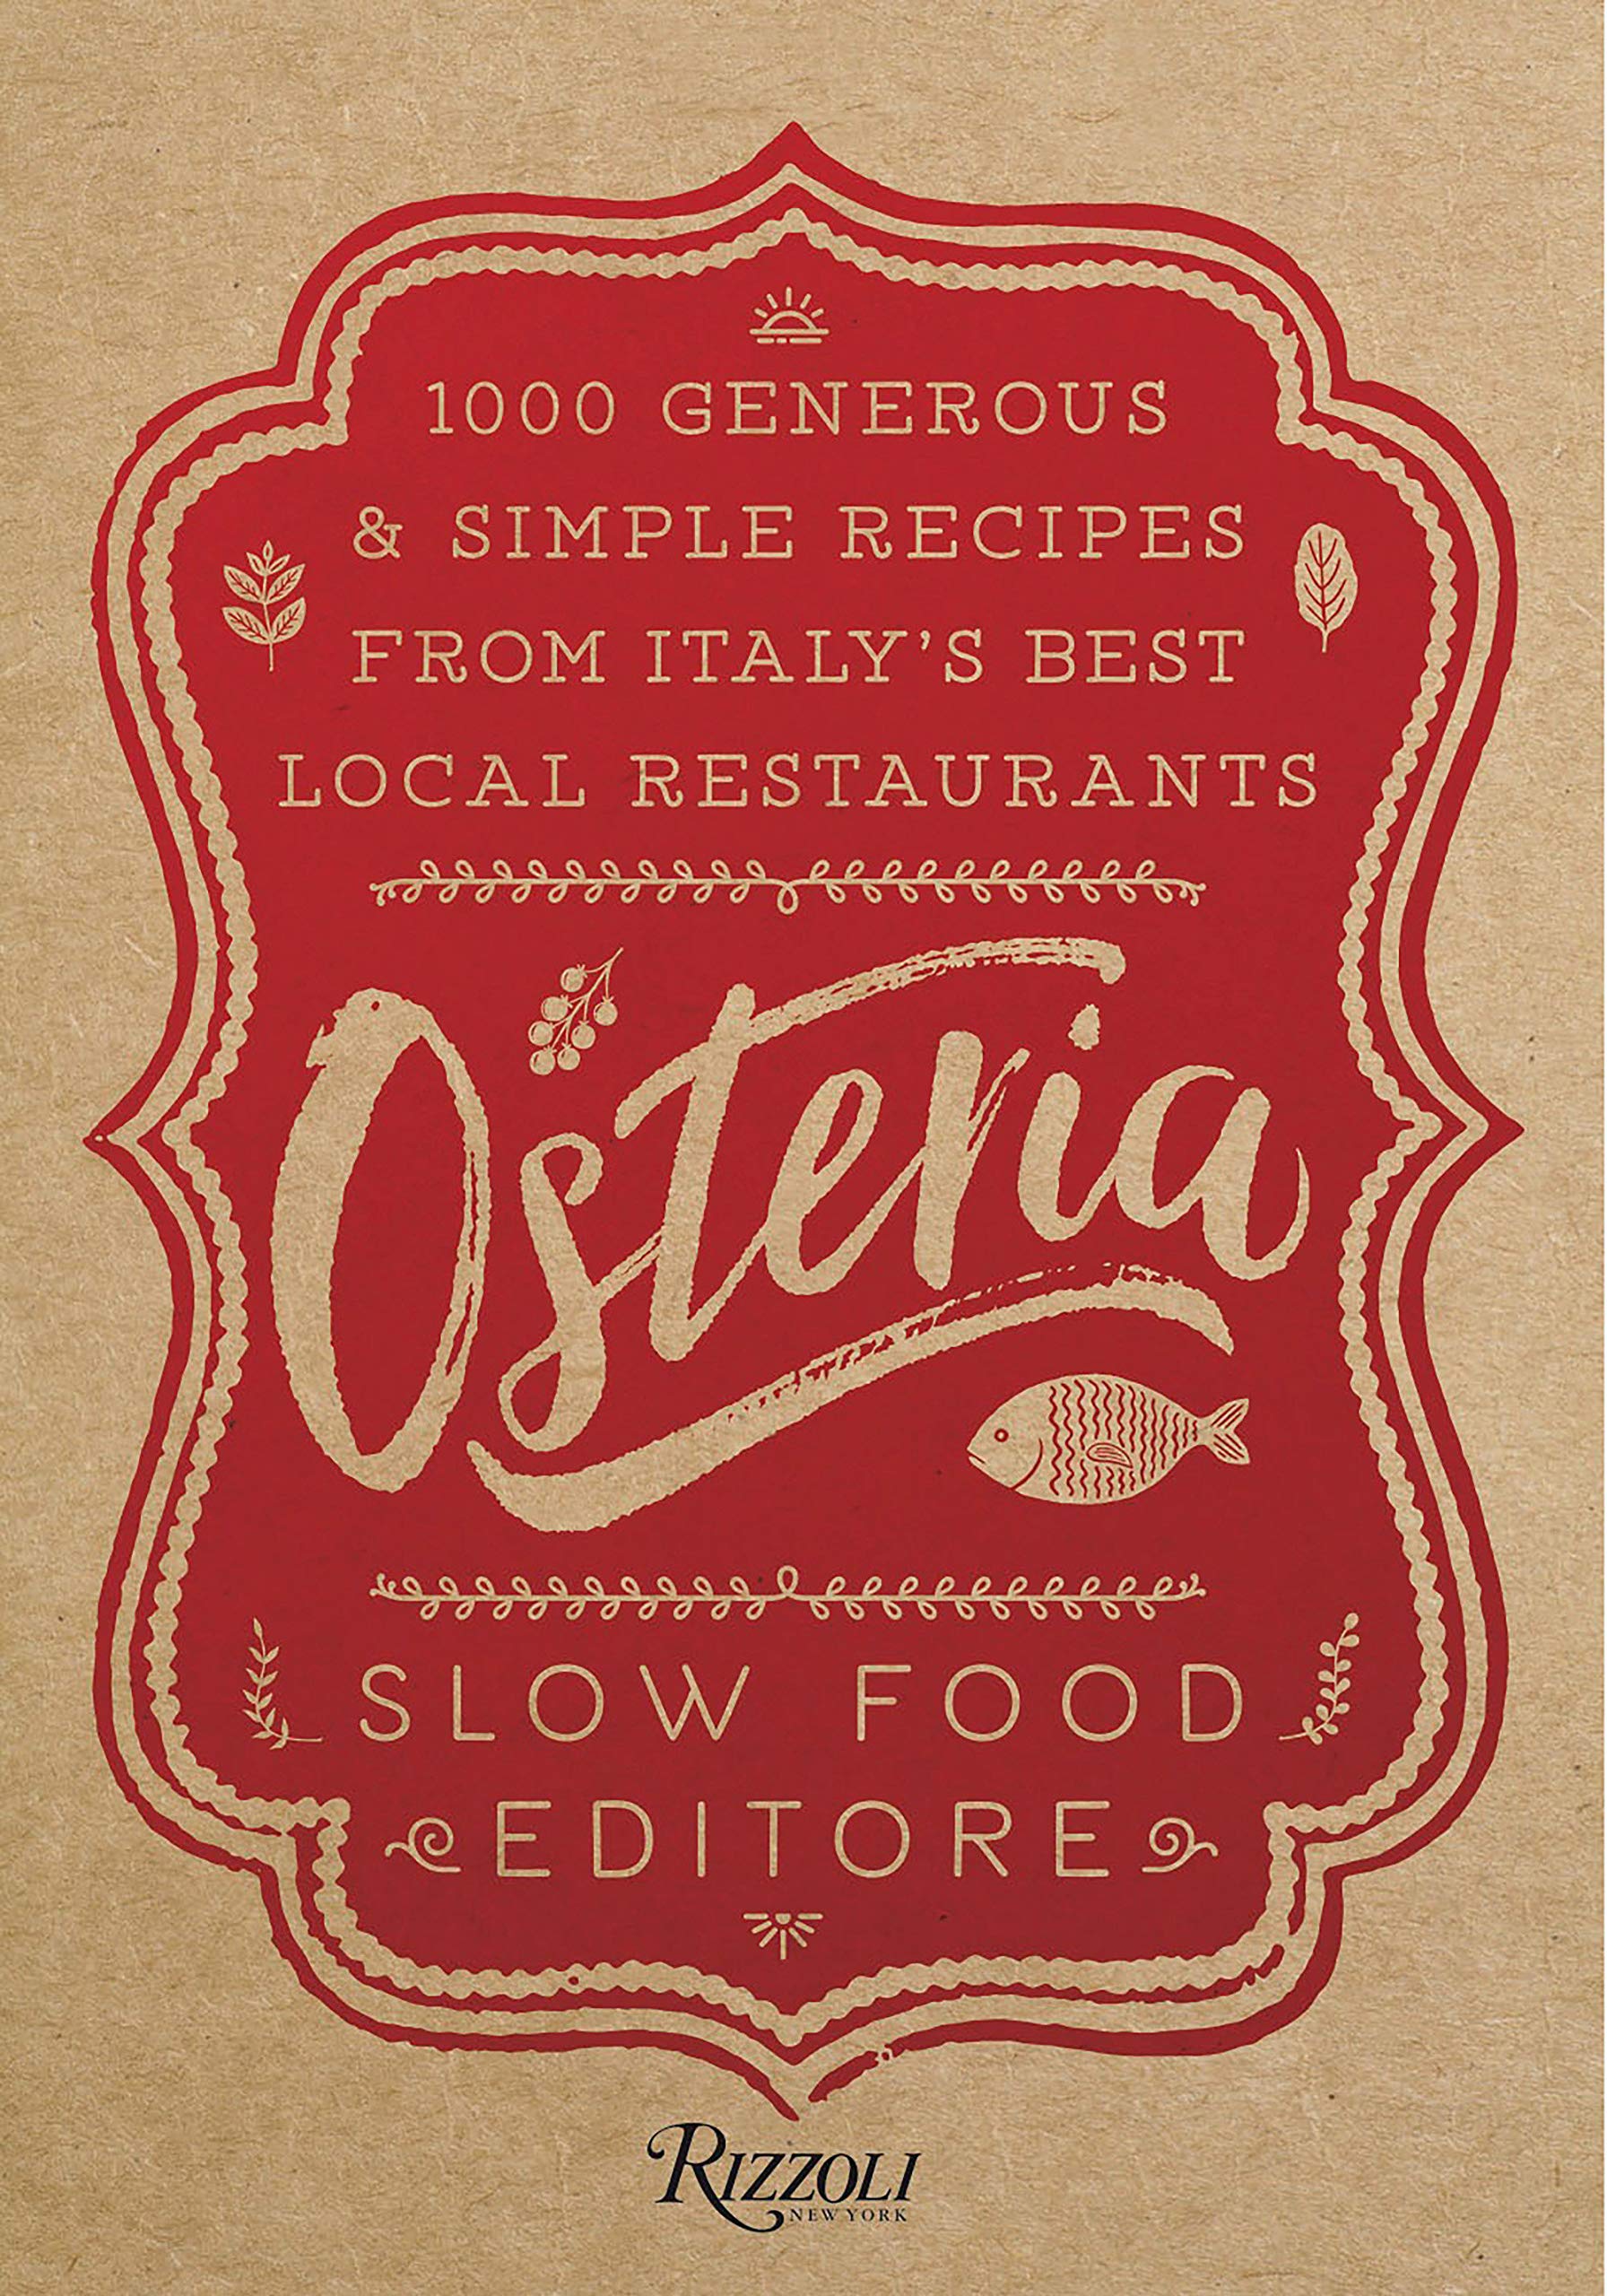 Osteria: 1000 Generous and Simple Recipes From Italy's Best Local Restaurants, Slow Food Author Rizzoli LIB-077